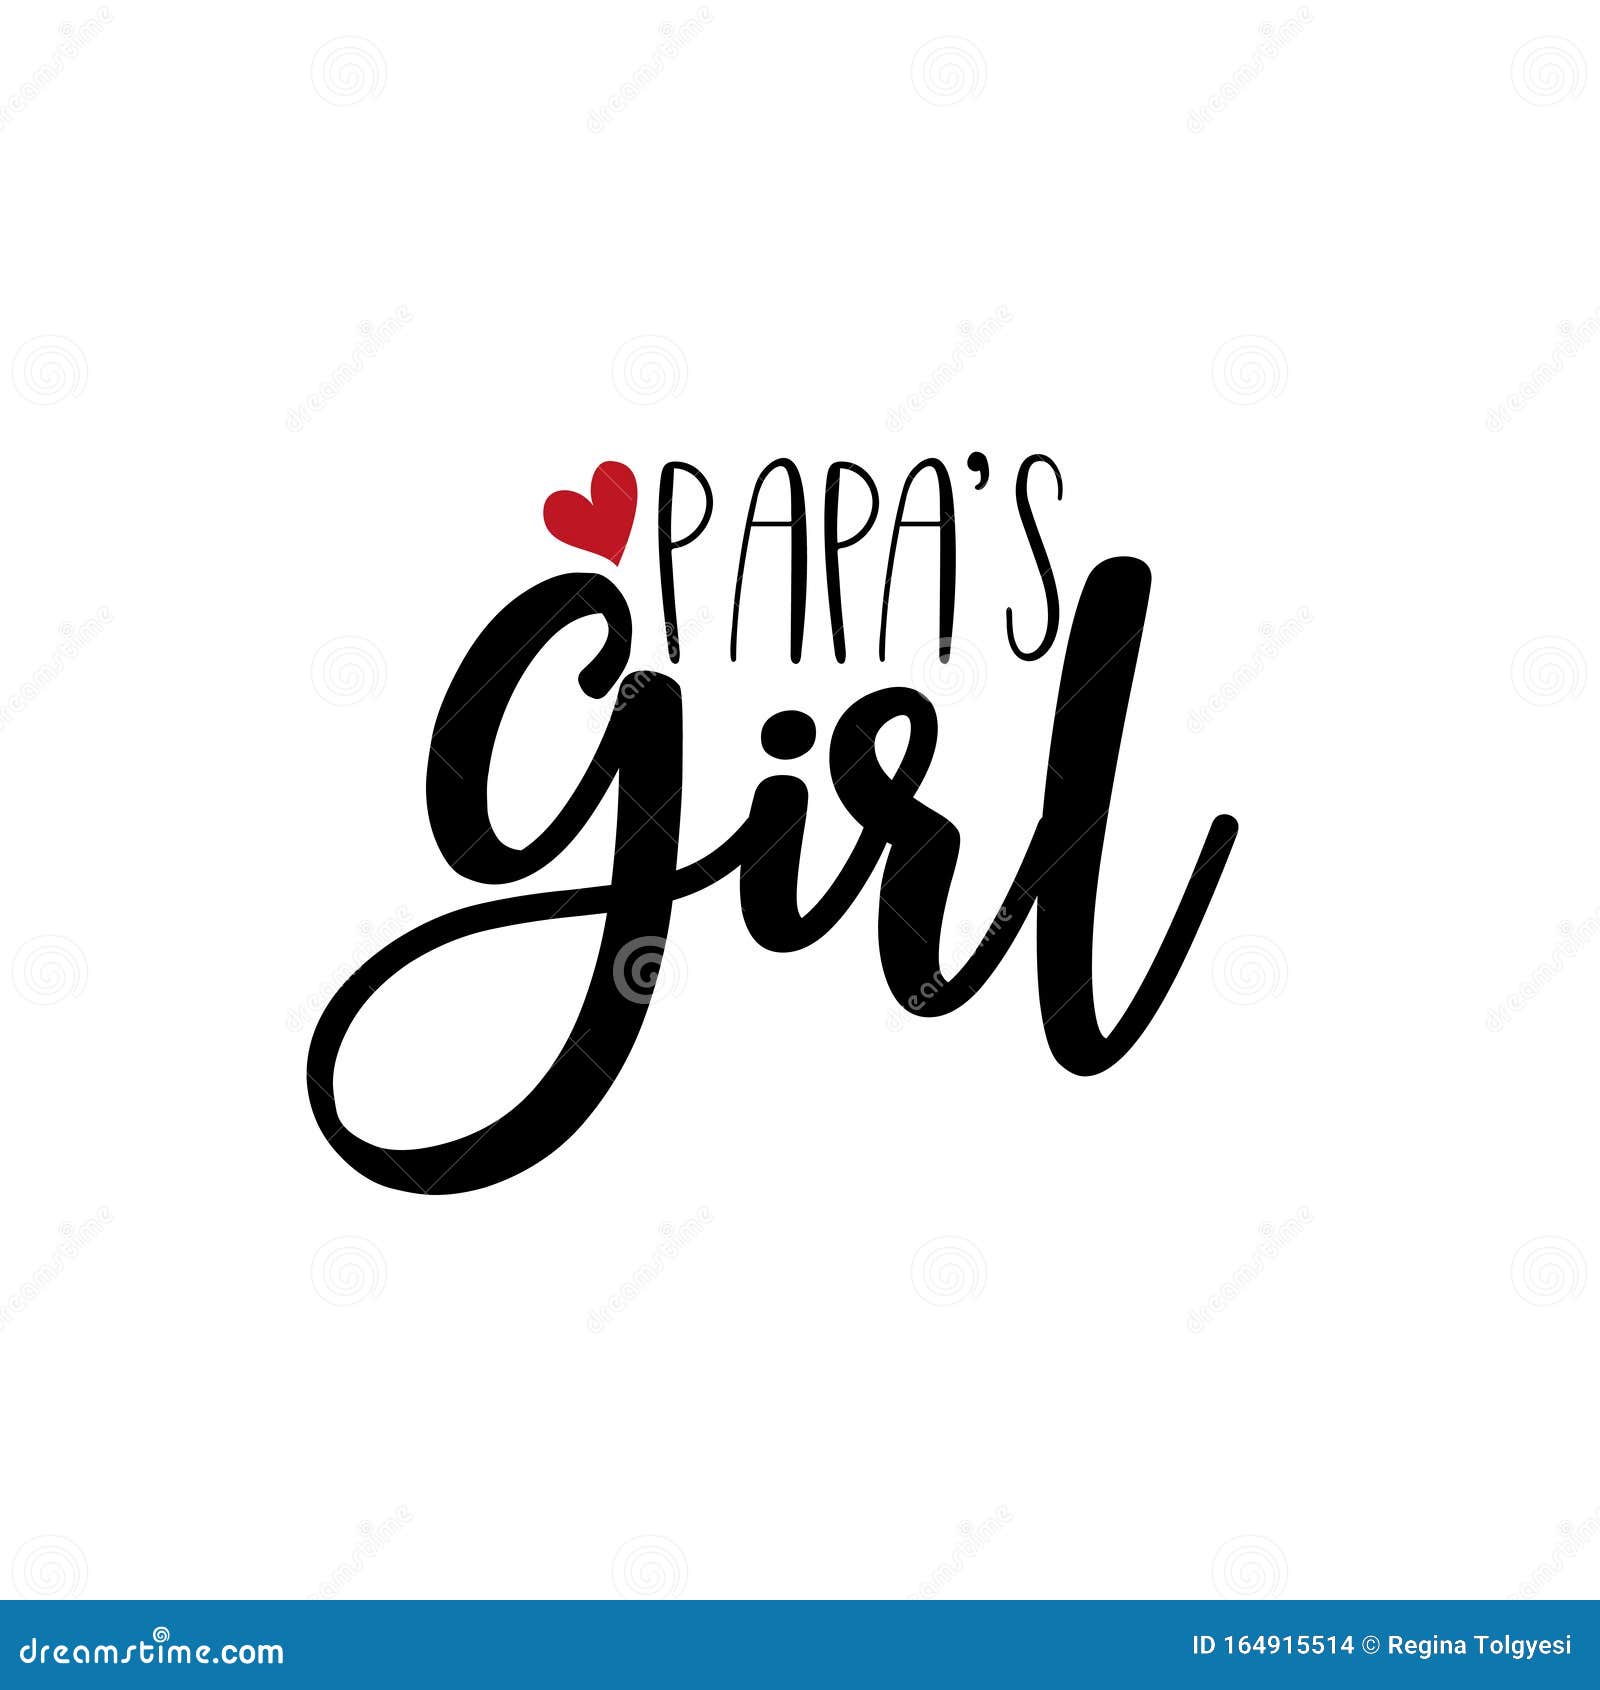 papa`s girl text, with red heart.